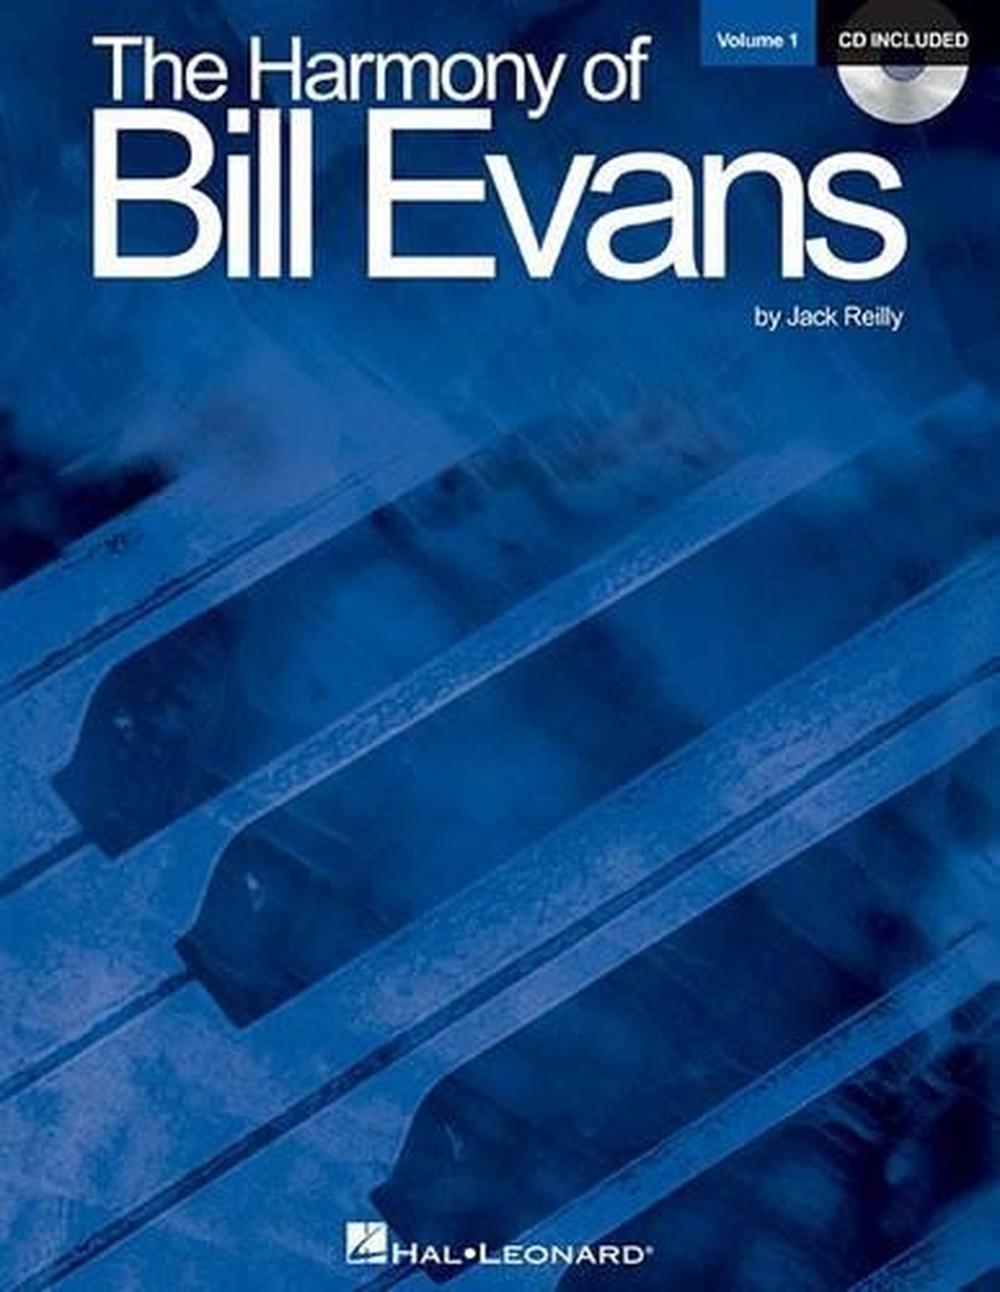 The Harmony of Bill Evans, Volume 1 [With CD (Audio)] by Jack Reilly